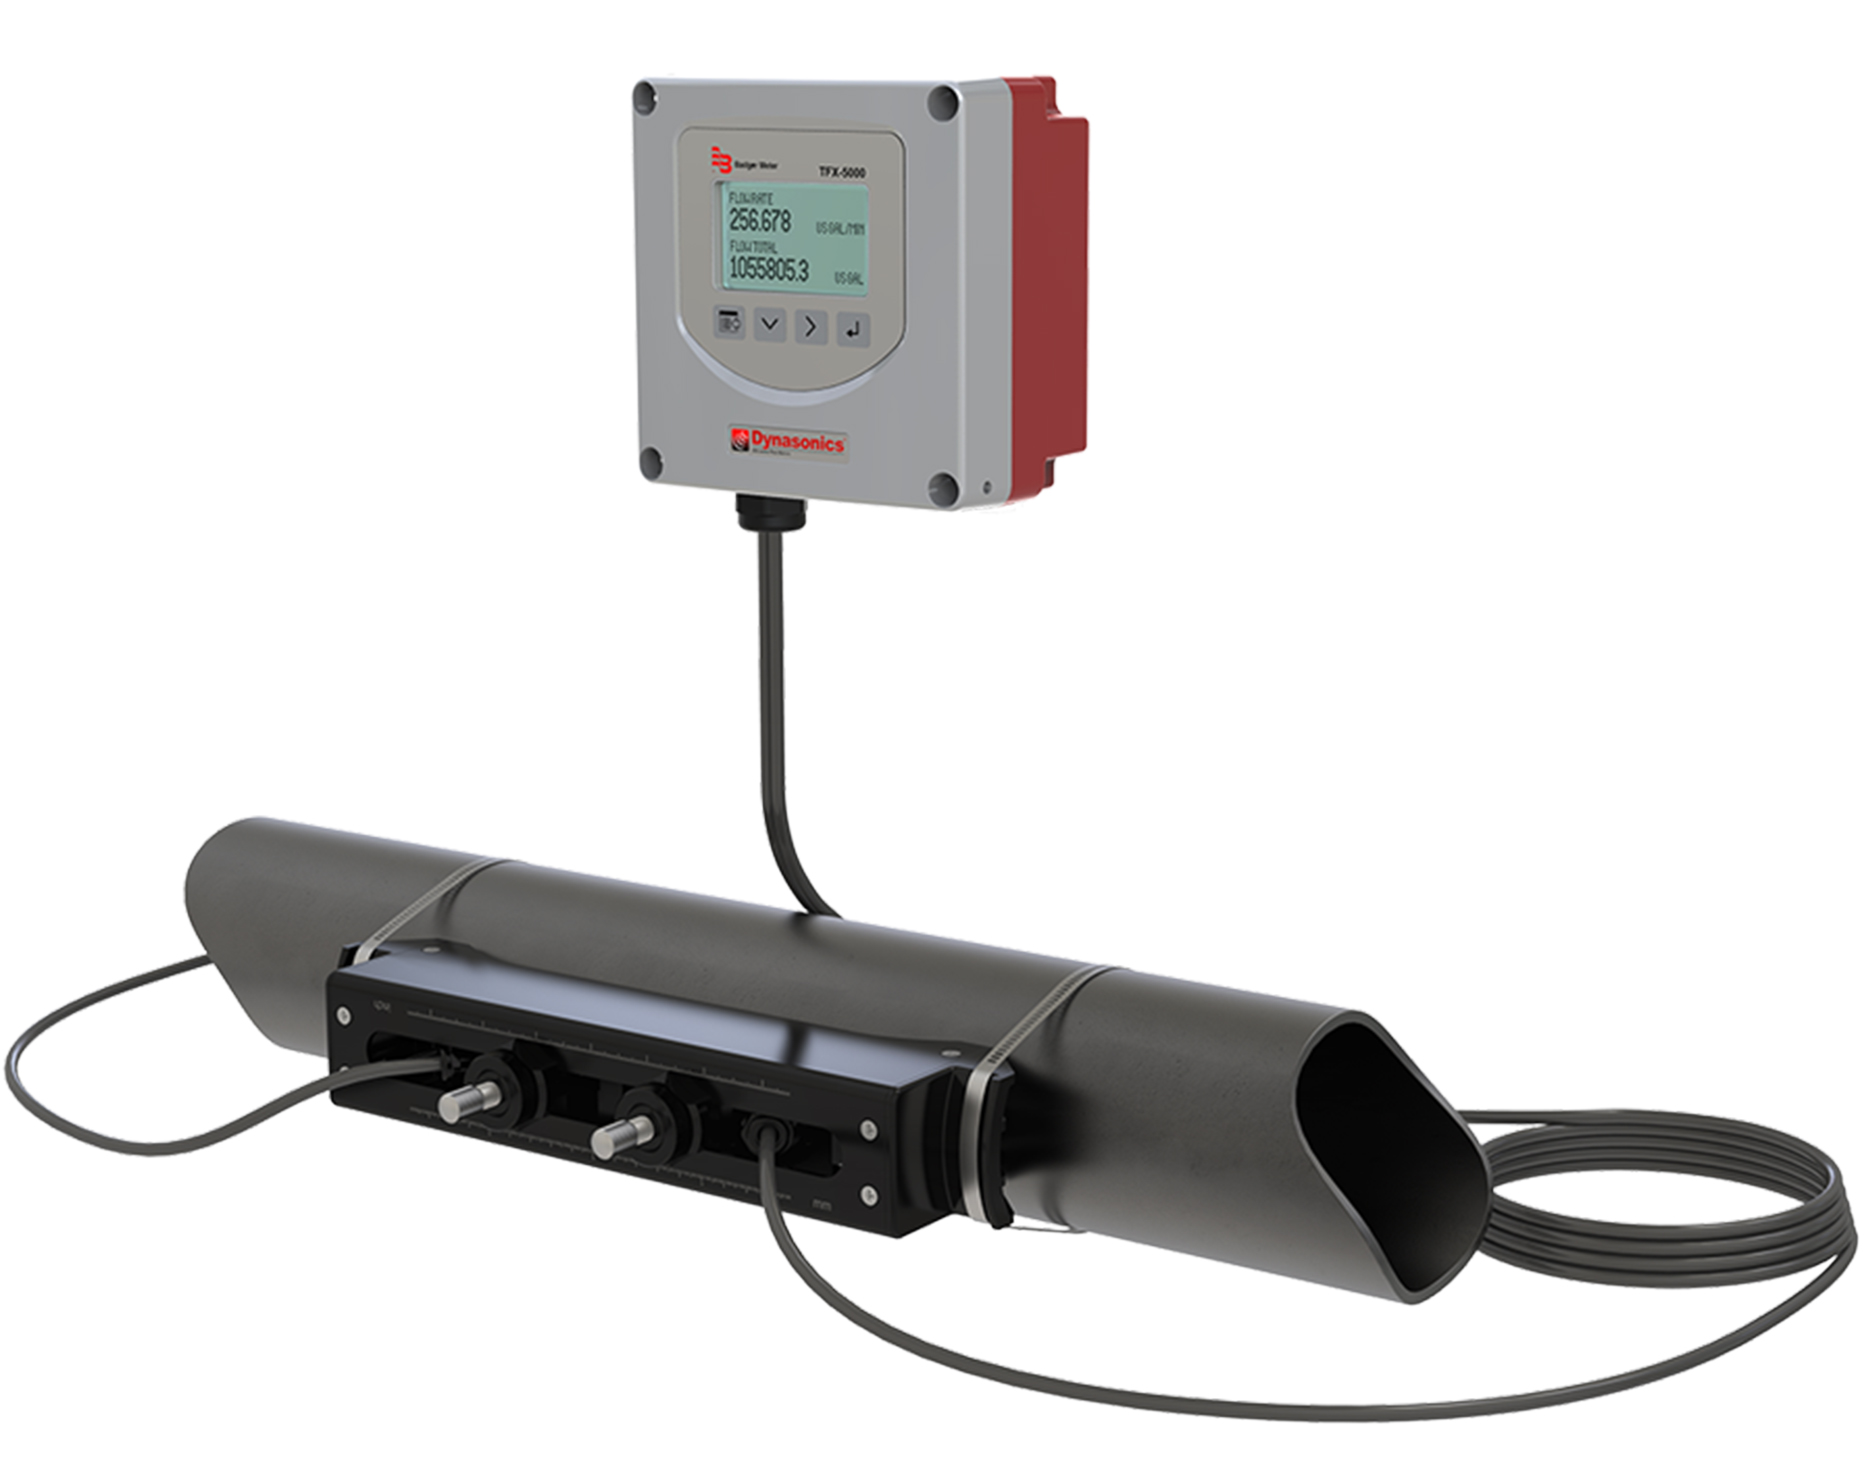 The TFX-5000 meter is designed for fluid flow metering and heating/cooling energy measurement.